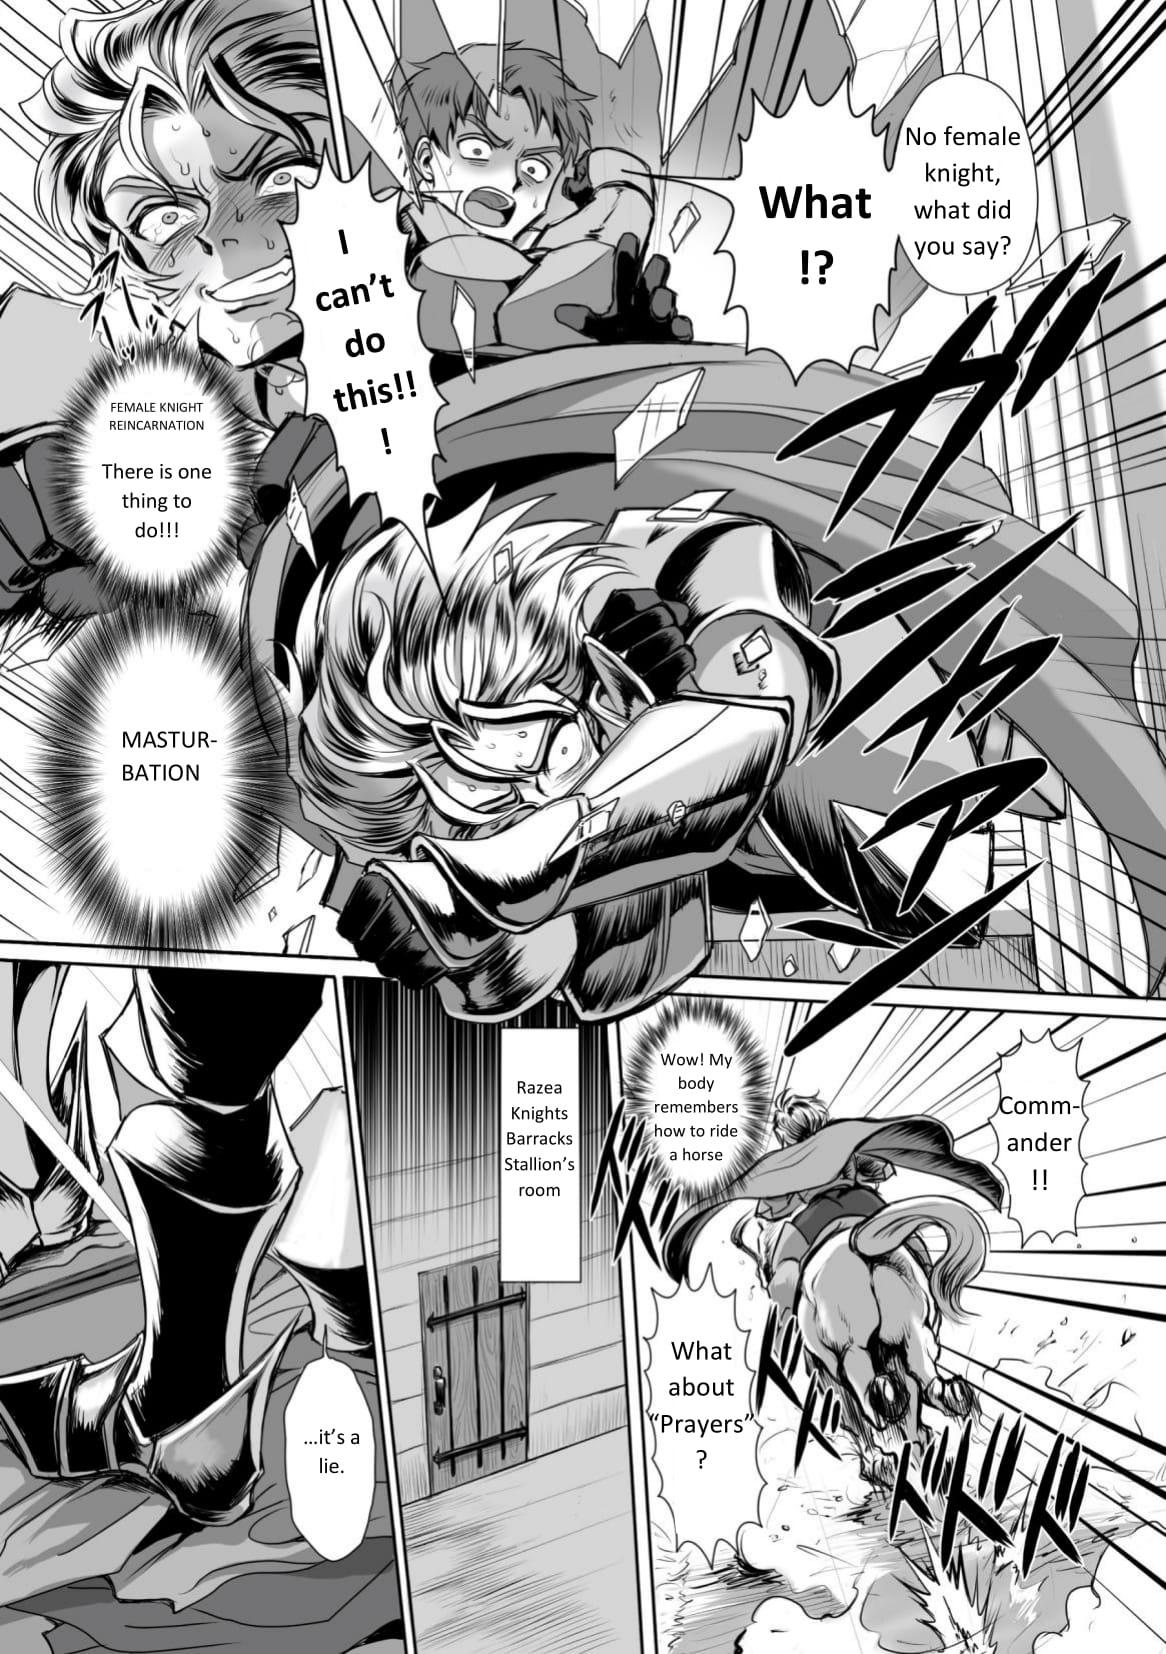 Spy [Usuno Taro] Possessed Knight Stallion-Taken Over By Disgusting Man Raped and Climaxes Unsightly - English Pussysex - Page 7